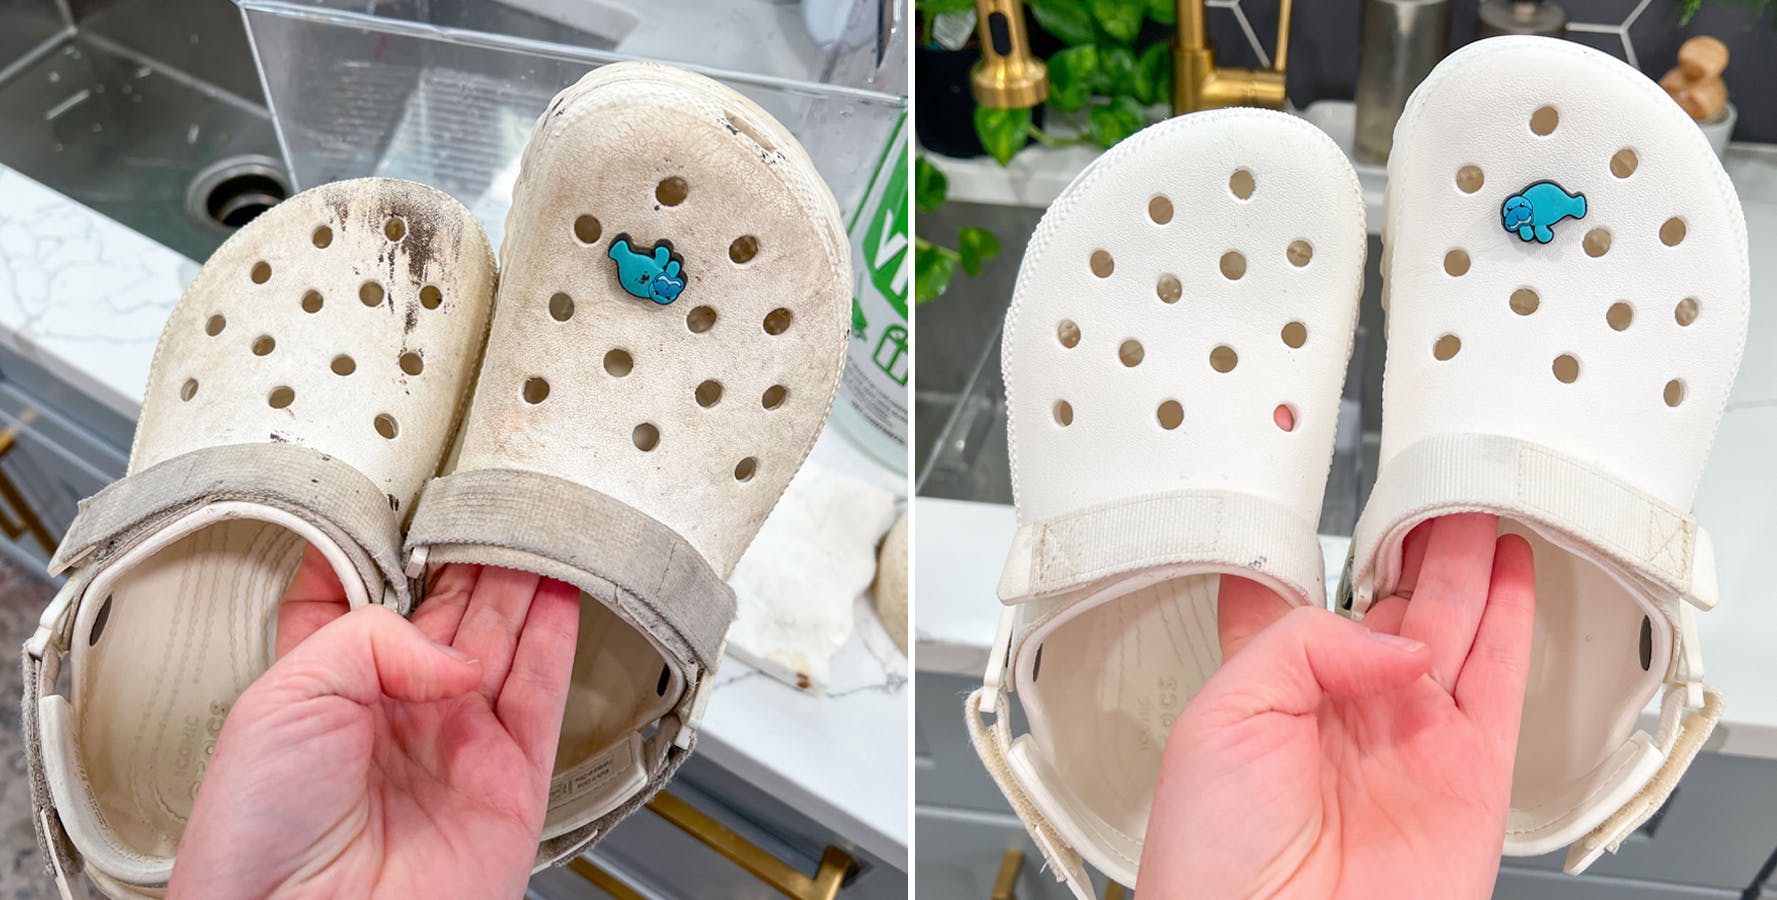 Two images side-by-side, one of a hand holding up a pair of dirty Crocs and the other of a hand holding up the same pair of Crocs after being cleaned.